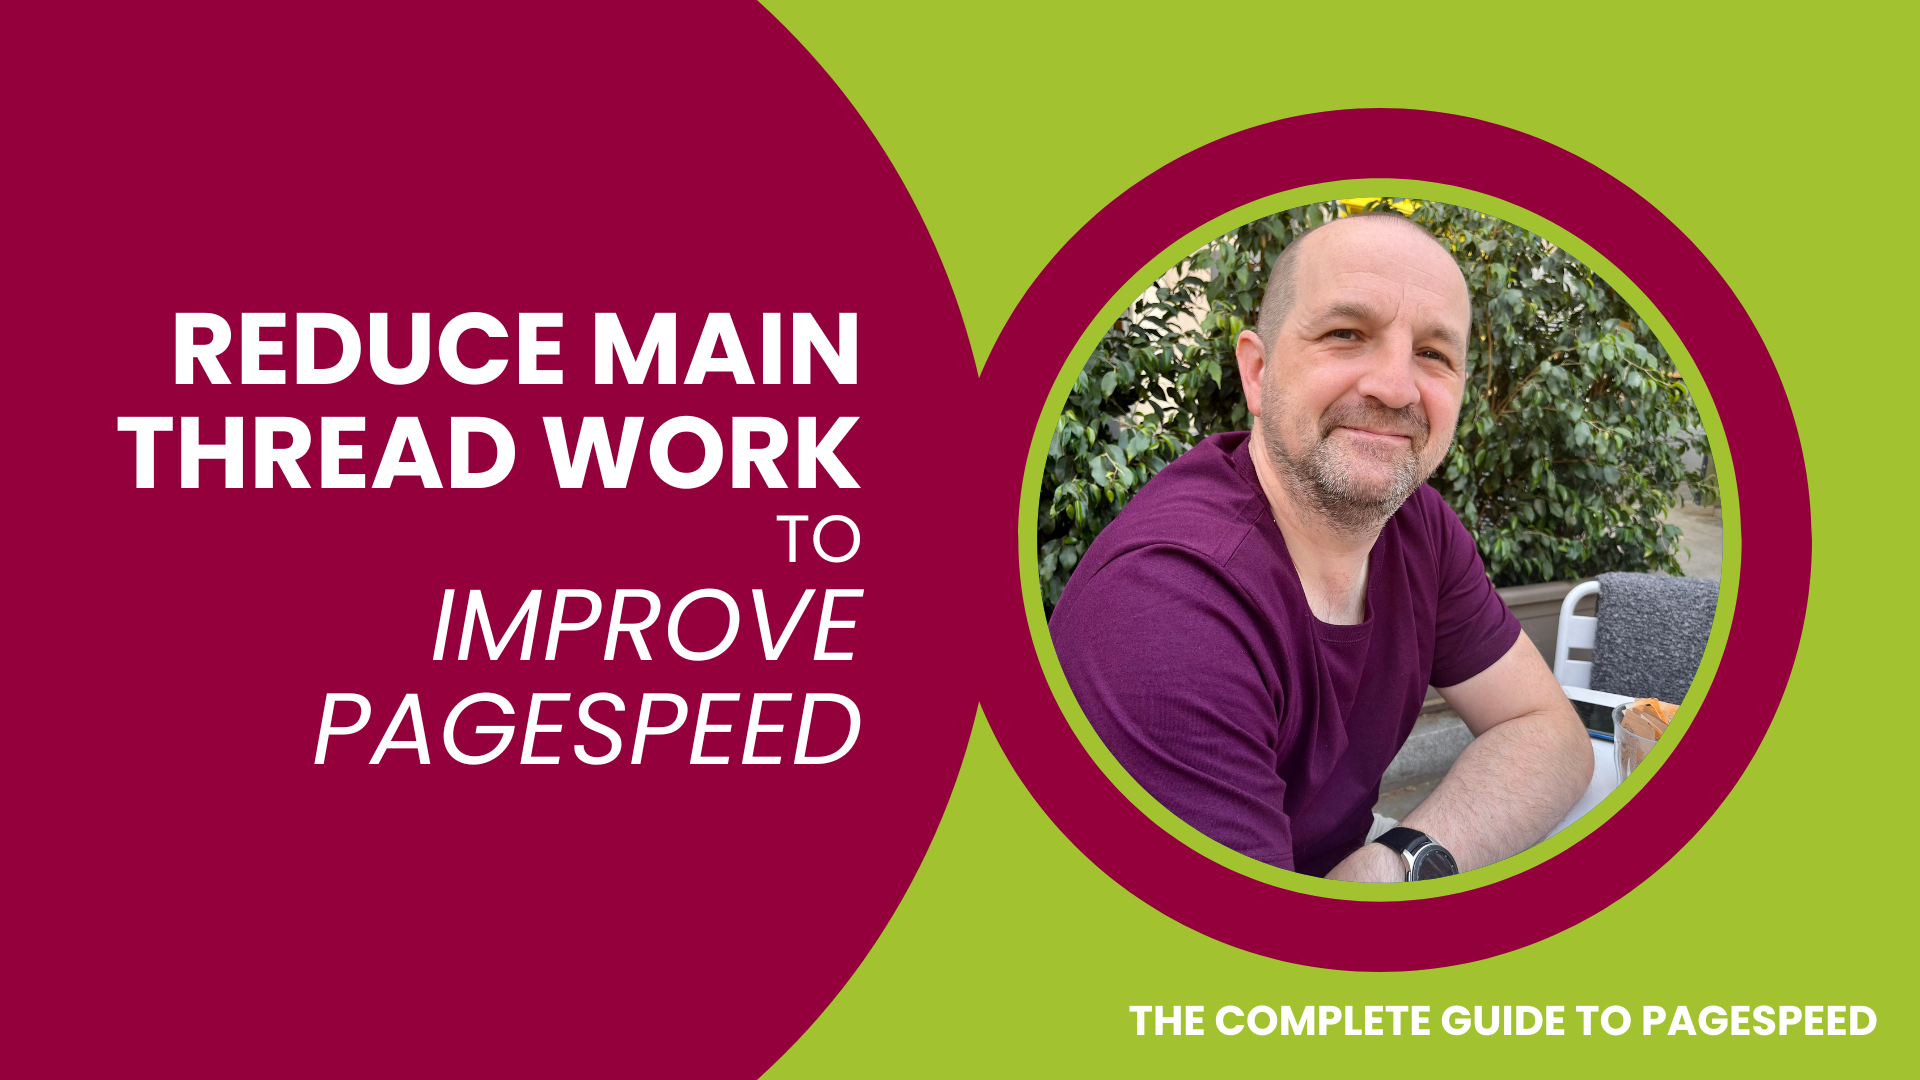 Reduce Main Thread Work to Improve Pagespeed